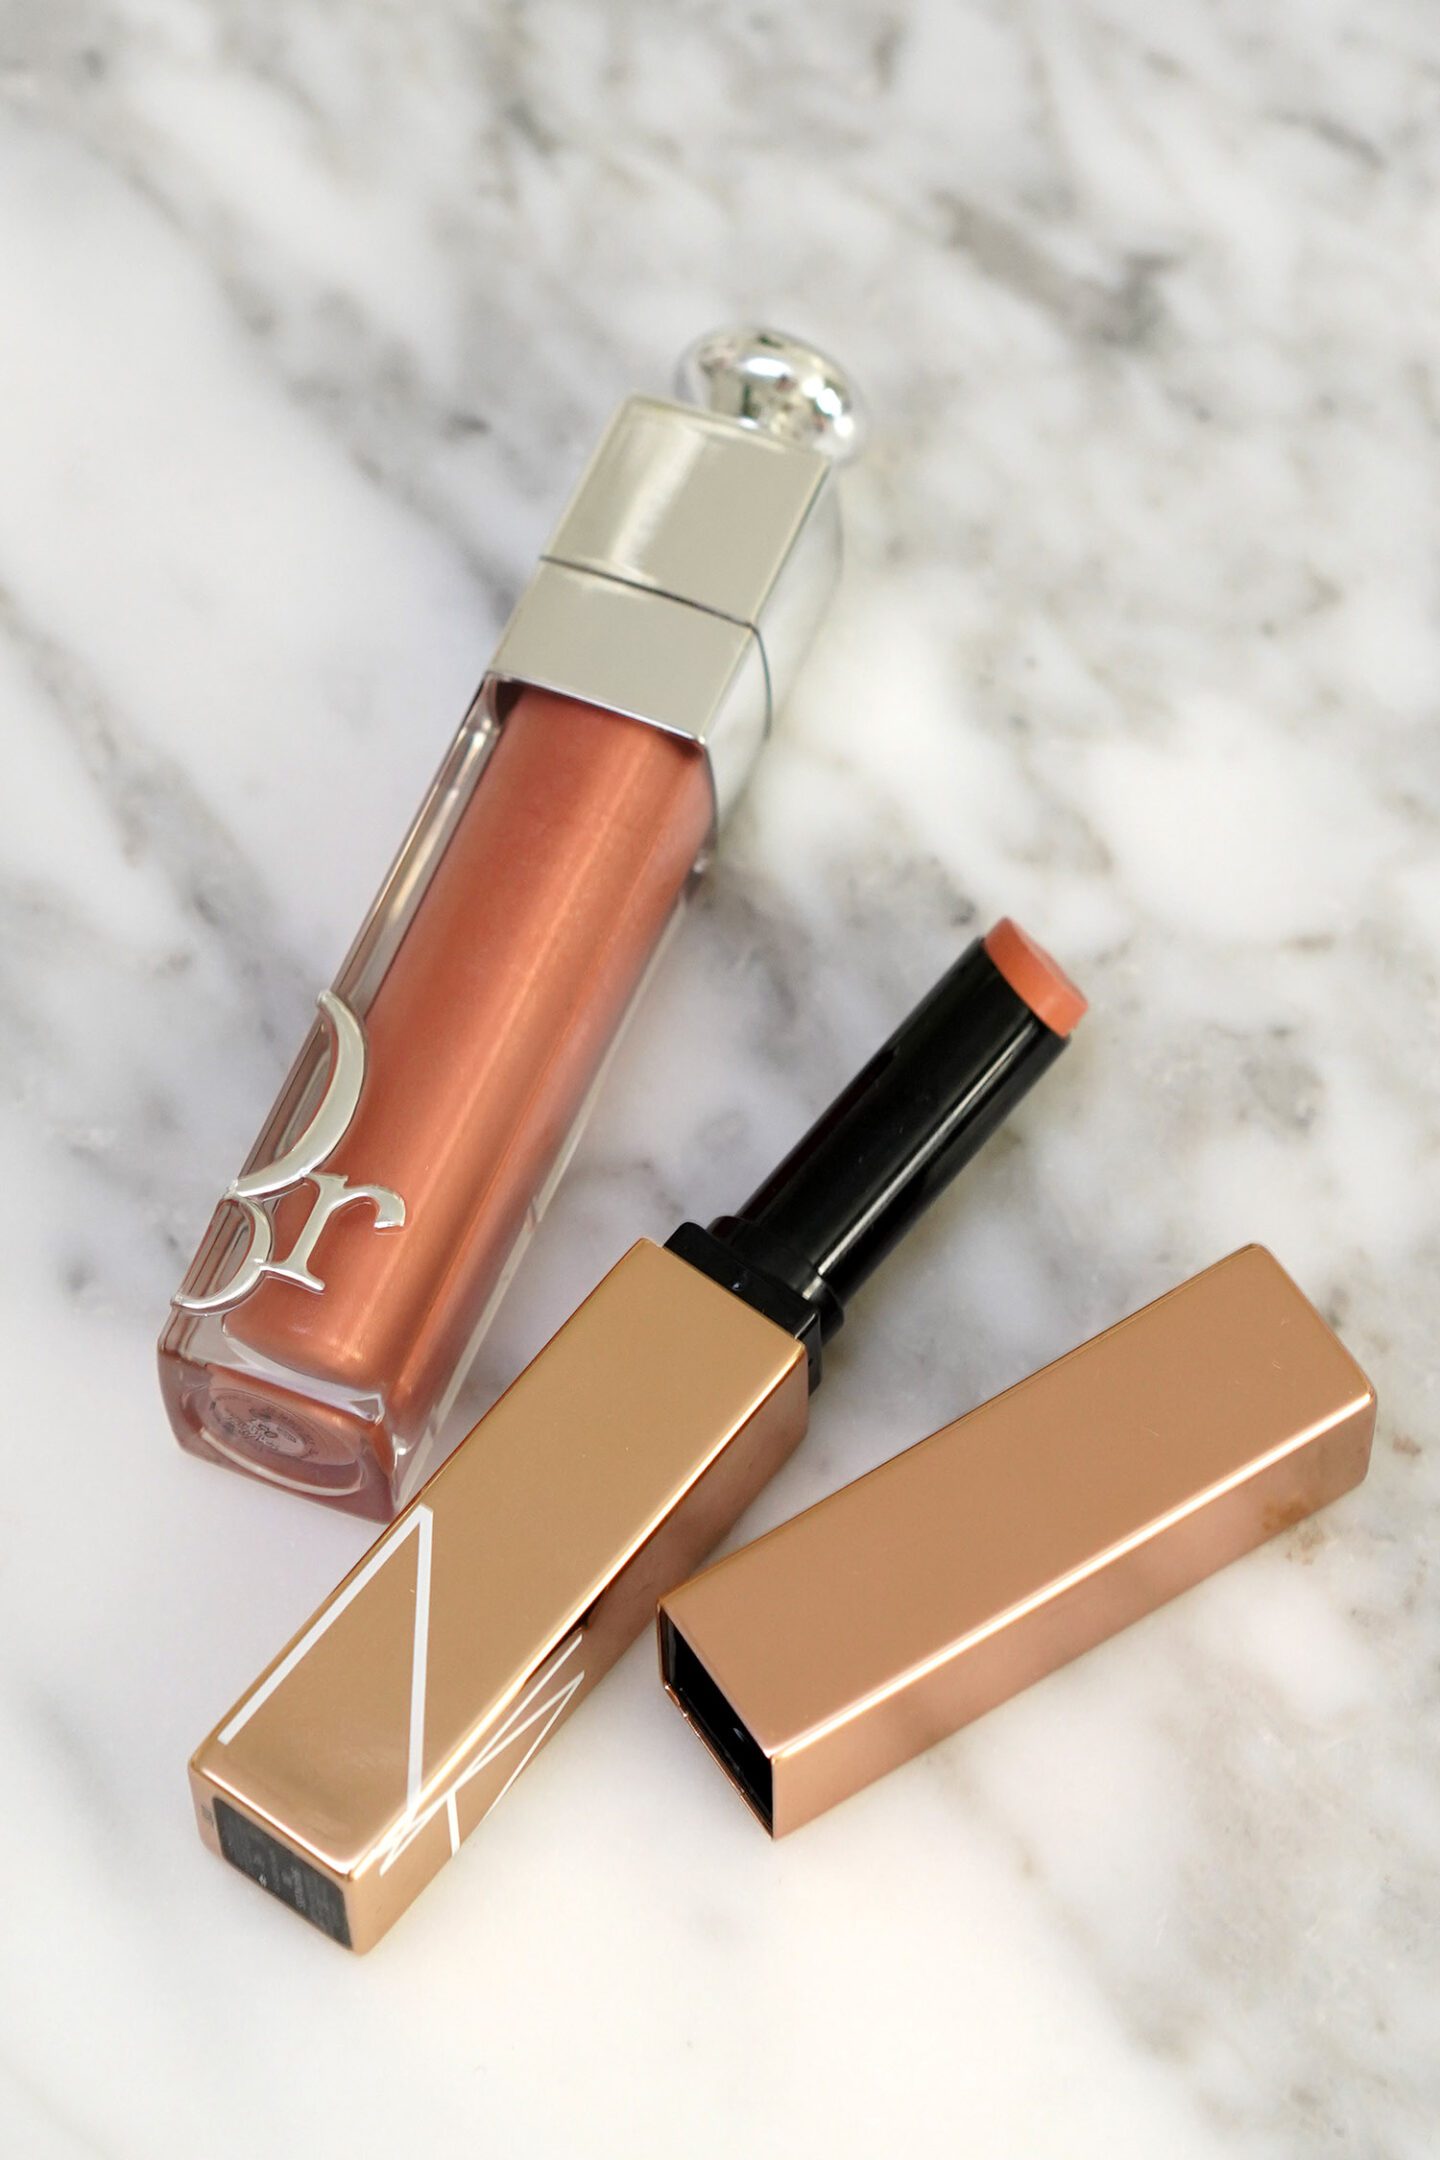 Dior Addict Lip Maximizer in Nude and NARS Afterglow Sensual Shine Breathless